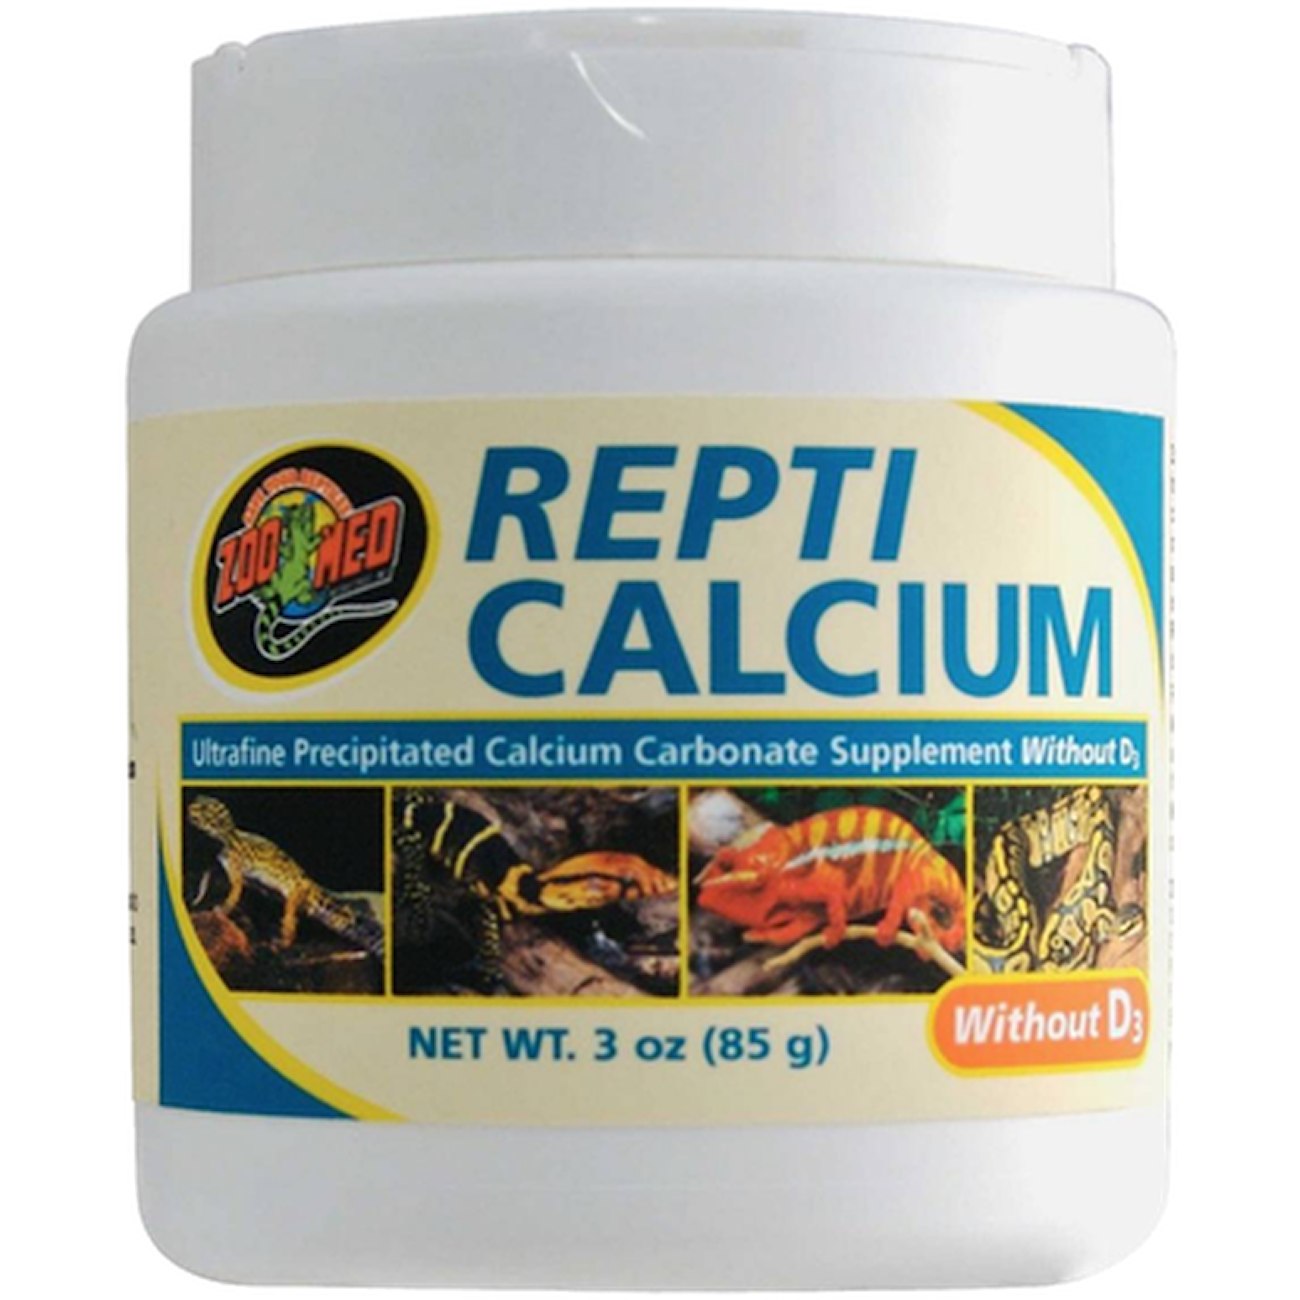 Repti Calcium without D3 Turquoise 85 g